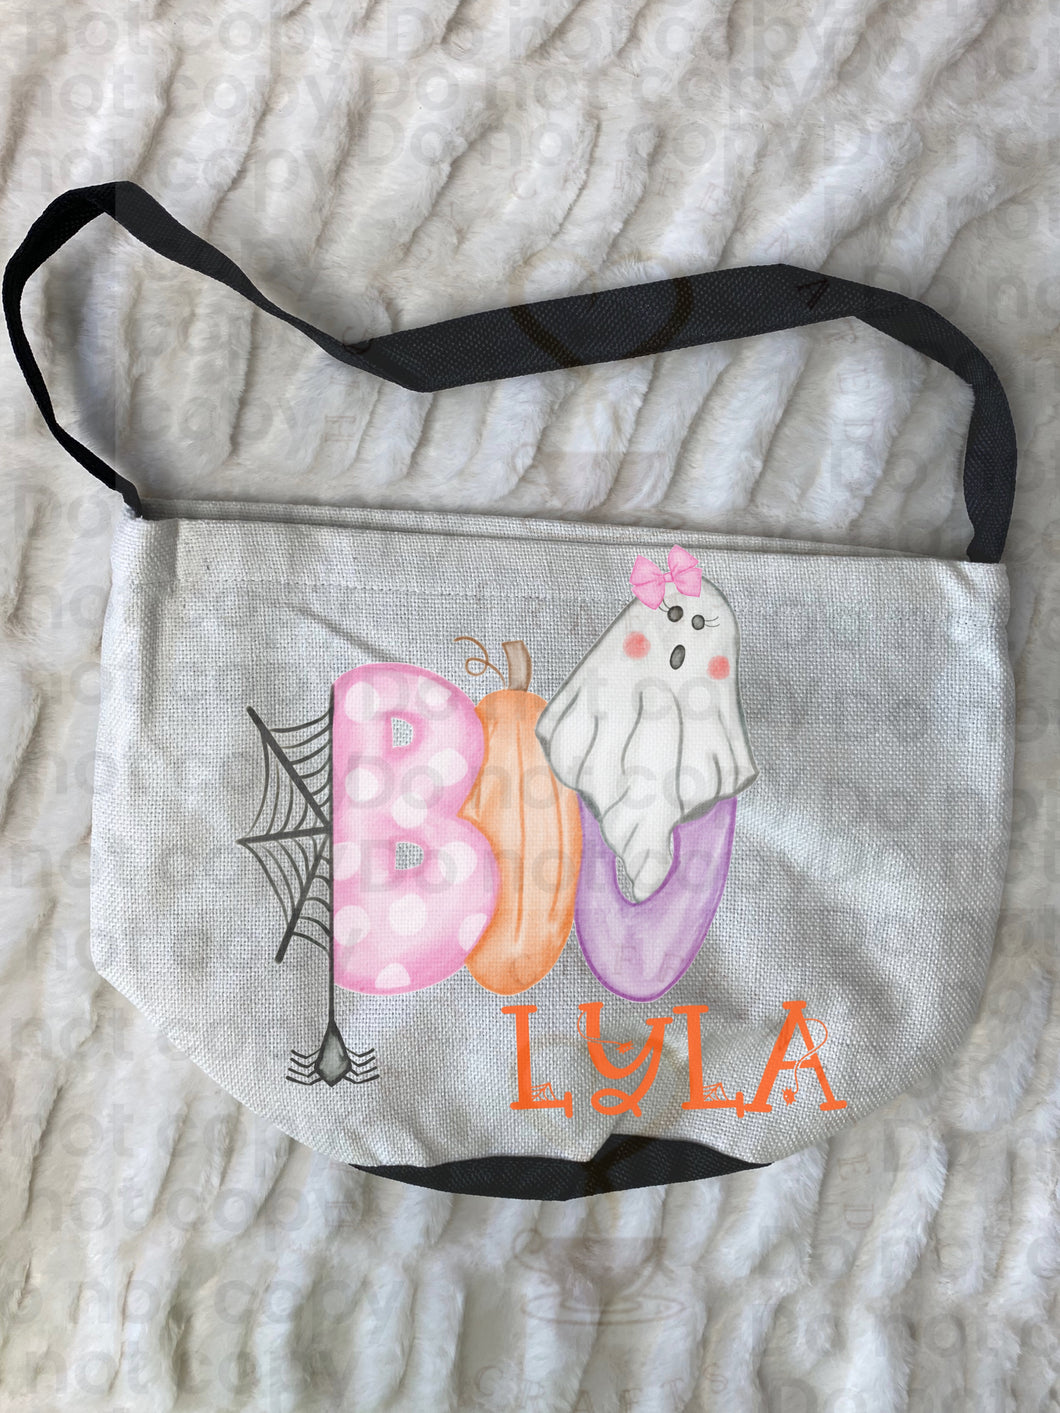 Trick or Treat Bags/totes